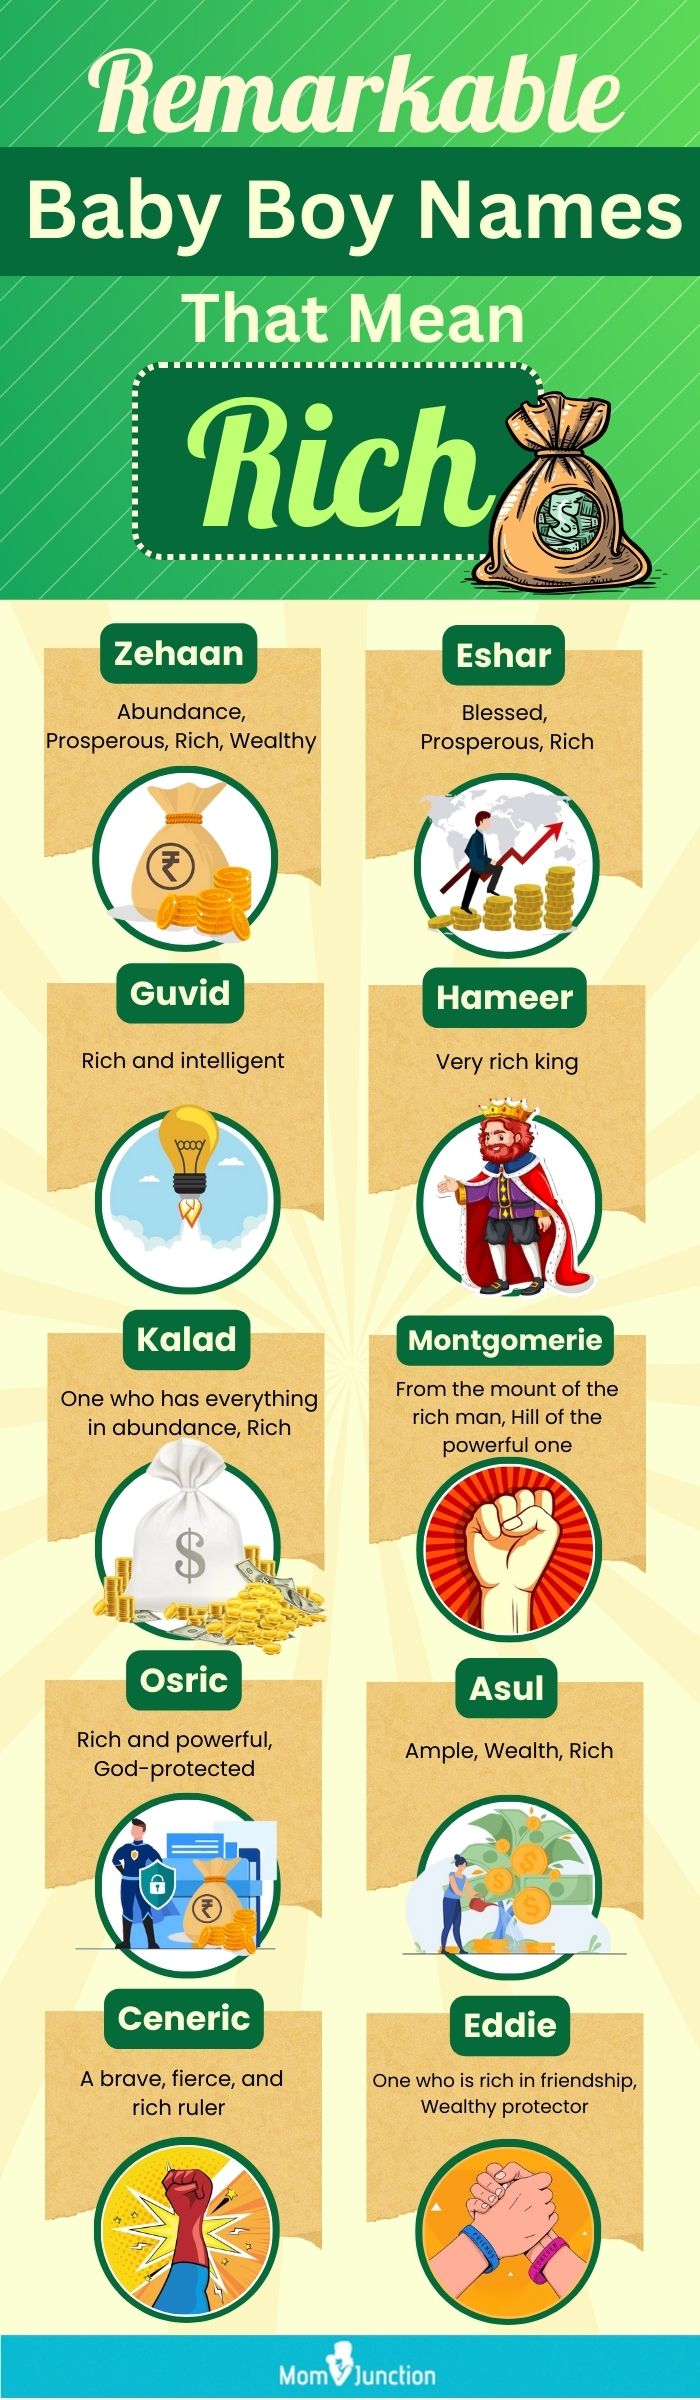 remarkable baby boy names that mean rich (infographic)